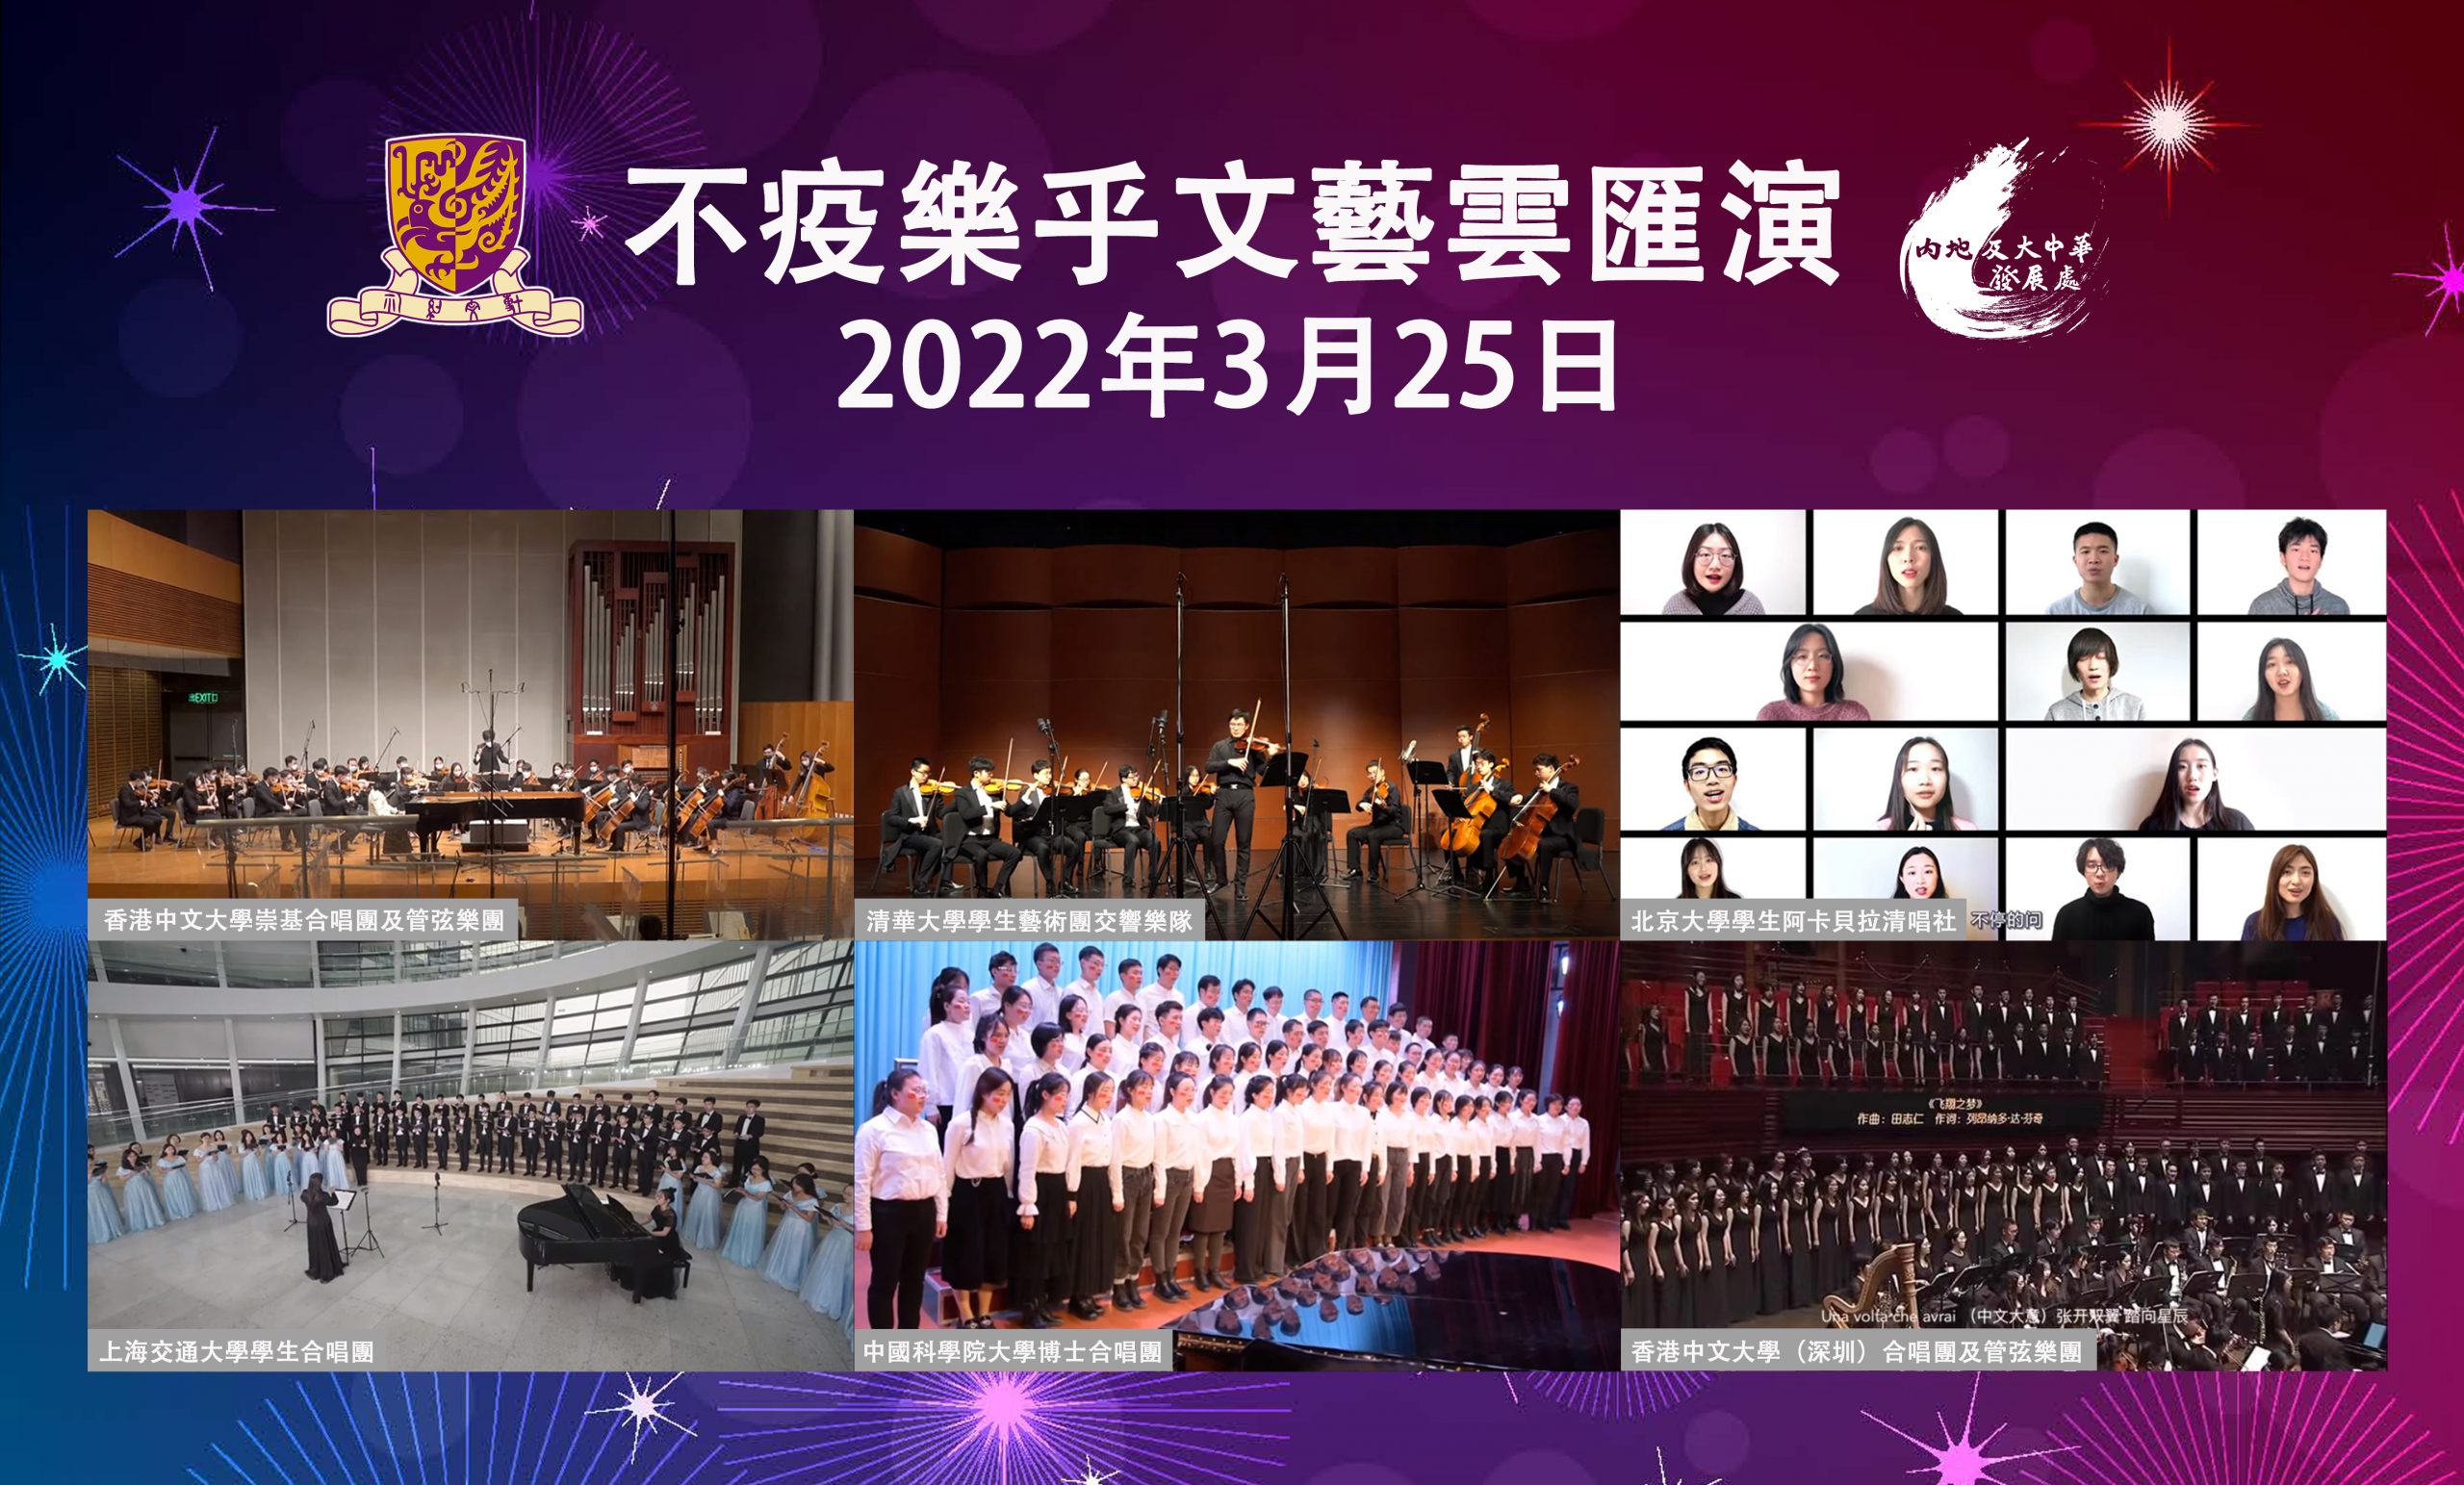 CUHK Organizes Pleasure in the Pandemic Joint Performance